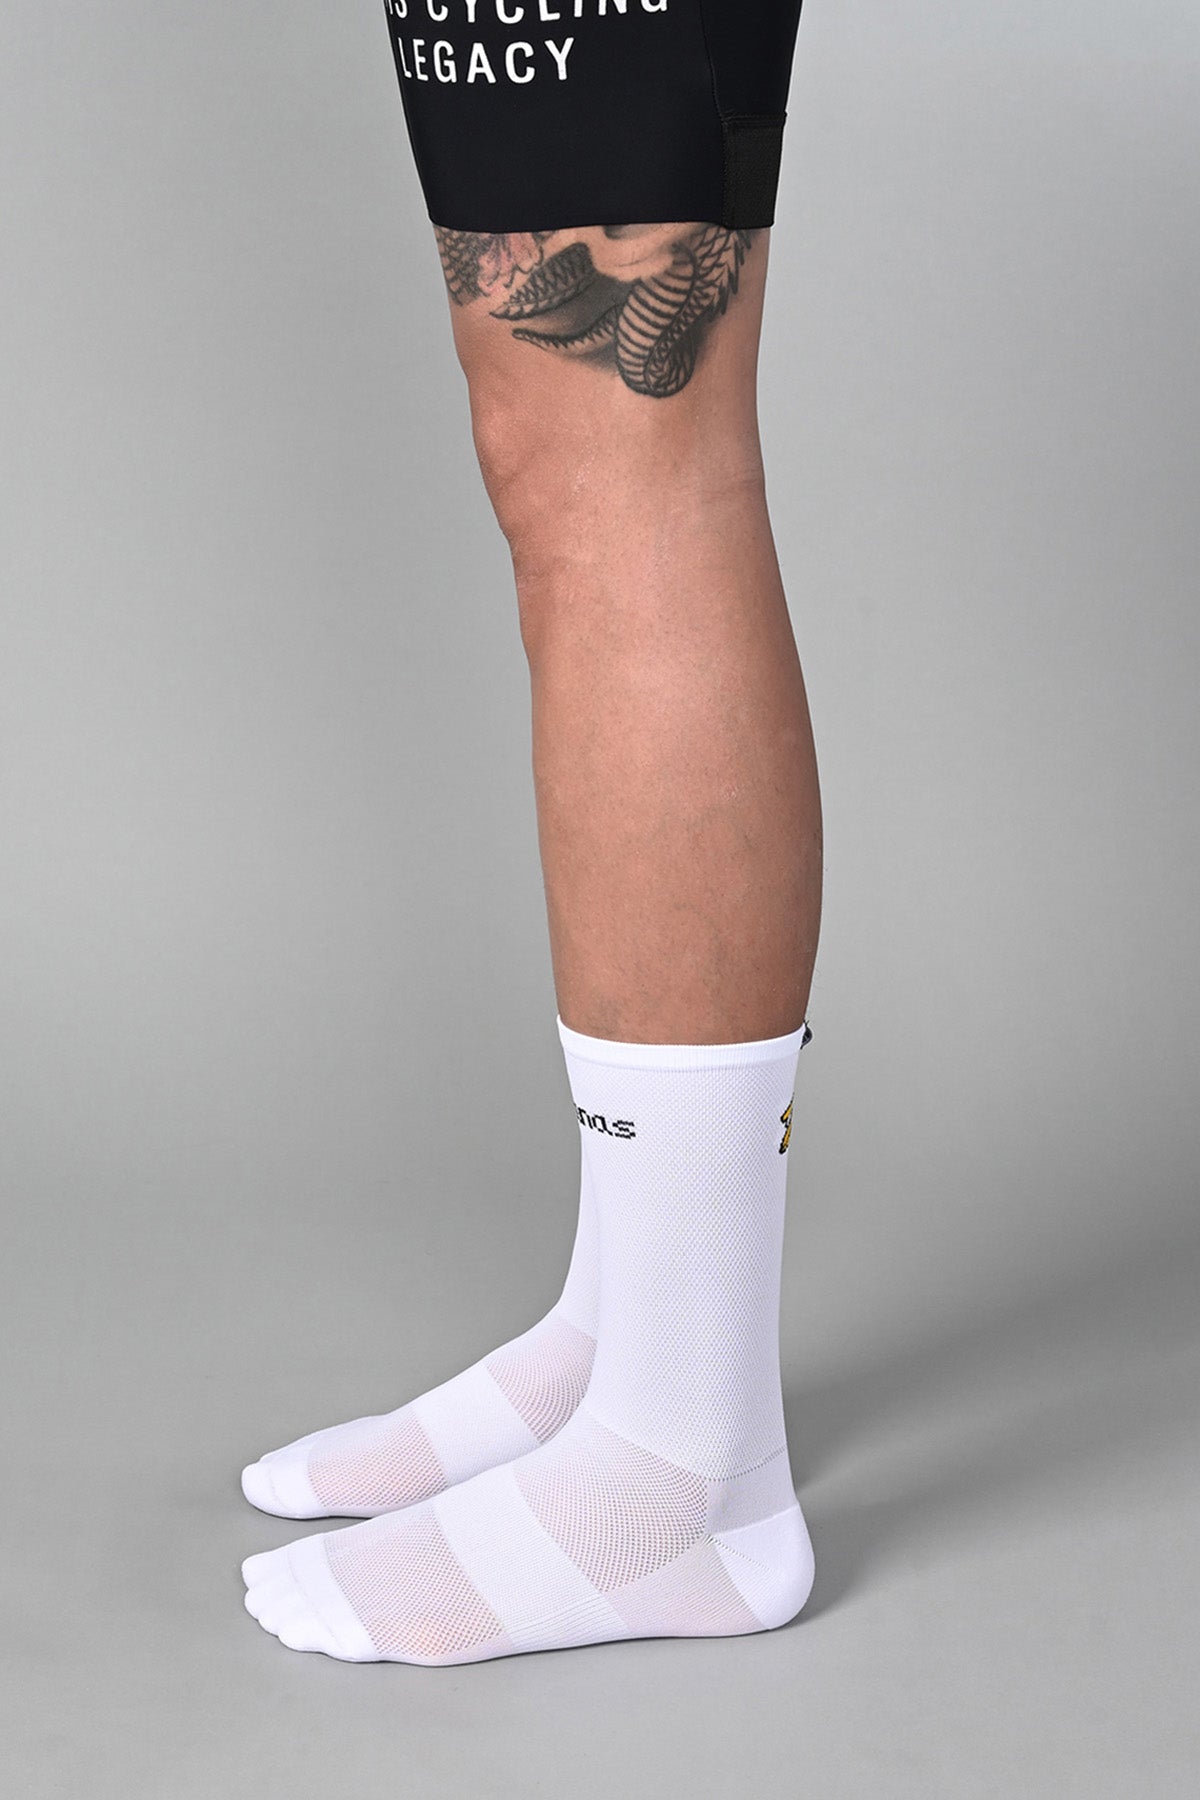 COOL BANANAS - WHITE SIDE | BEST CYCLING SOCKS